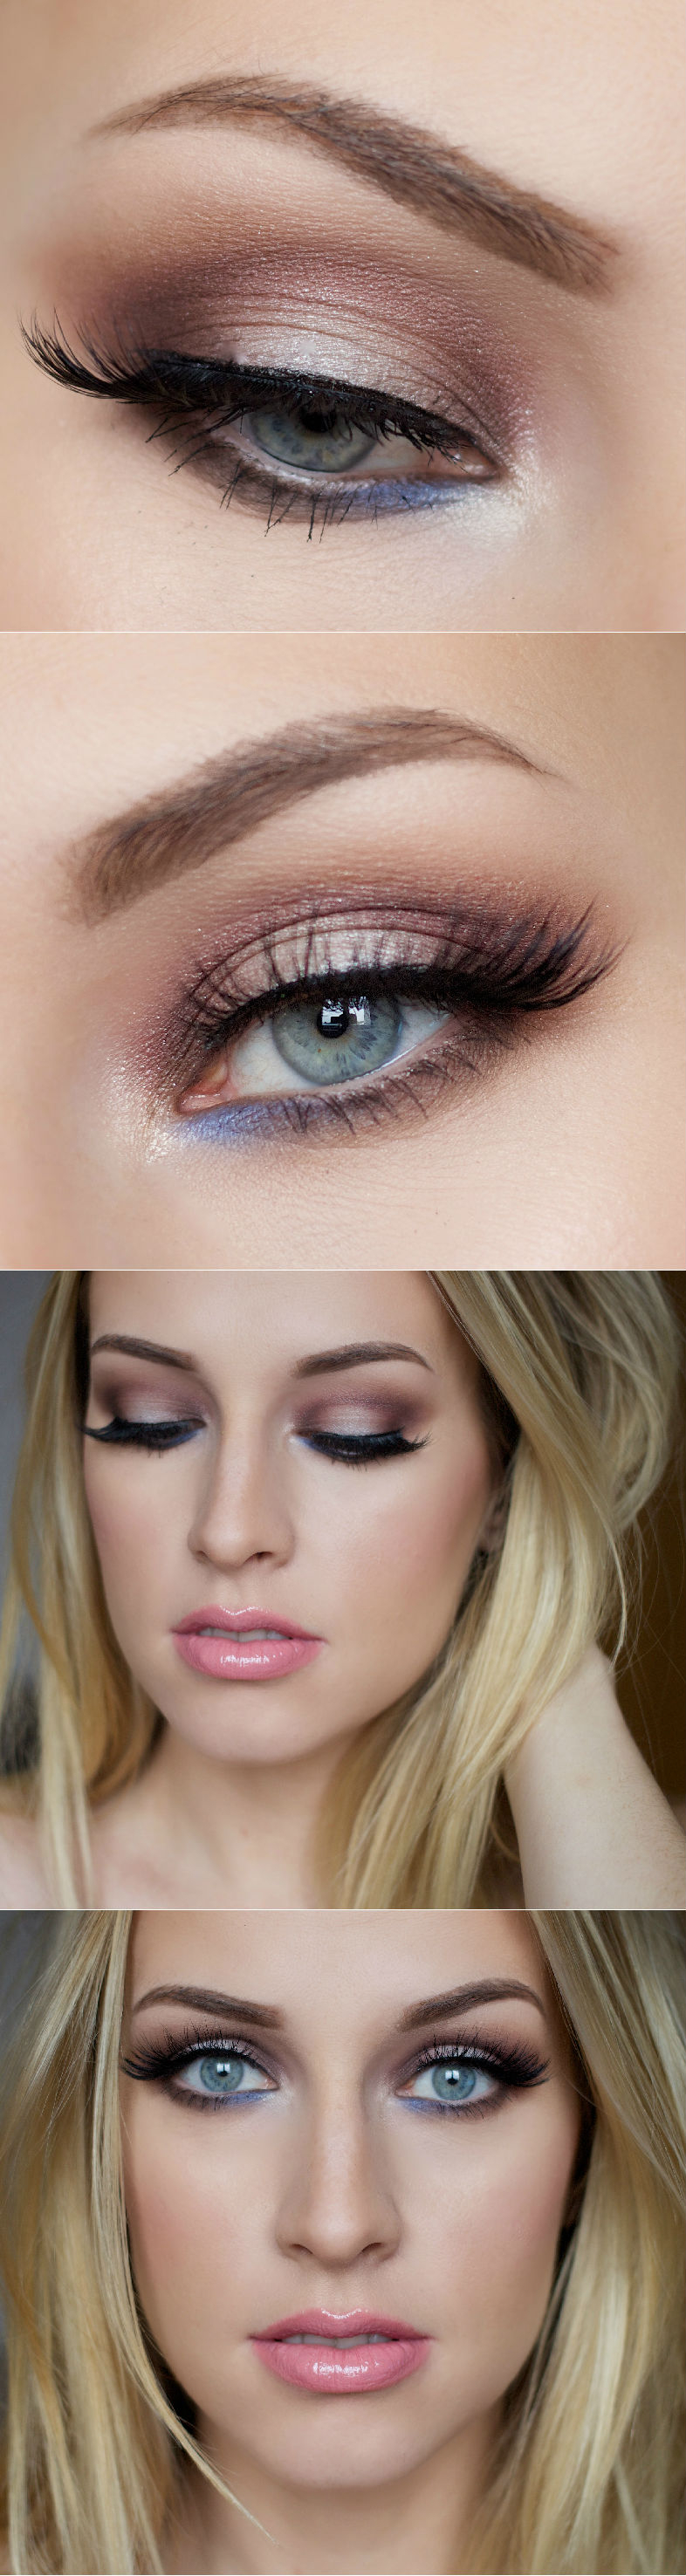 Formal Makeup Ideas For Blue Eyes 5 Ways To Make Blue Eyes Pop With Proper Eye Makeup Her Style Code